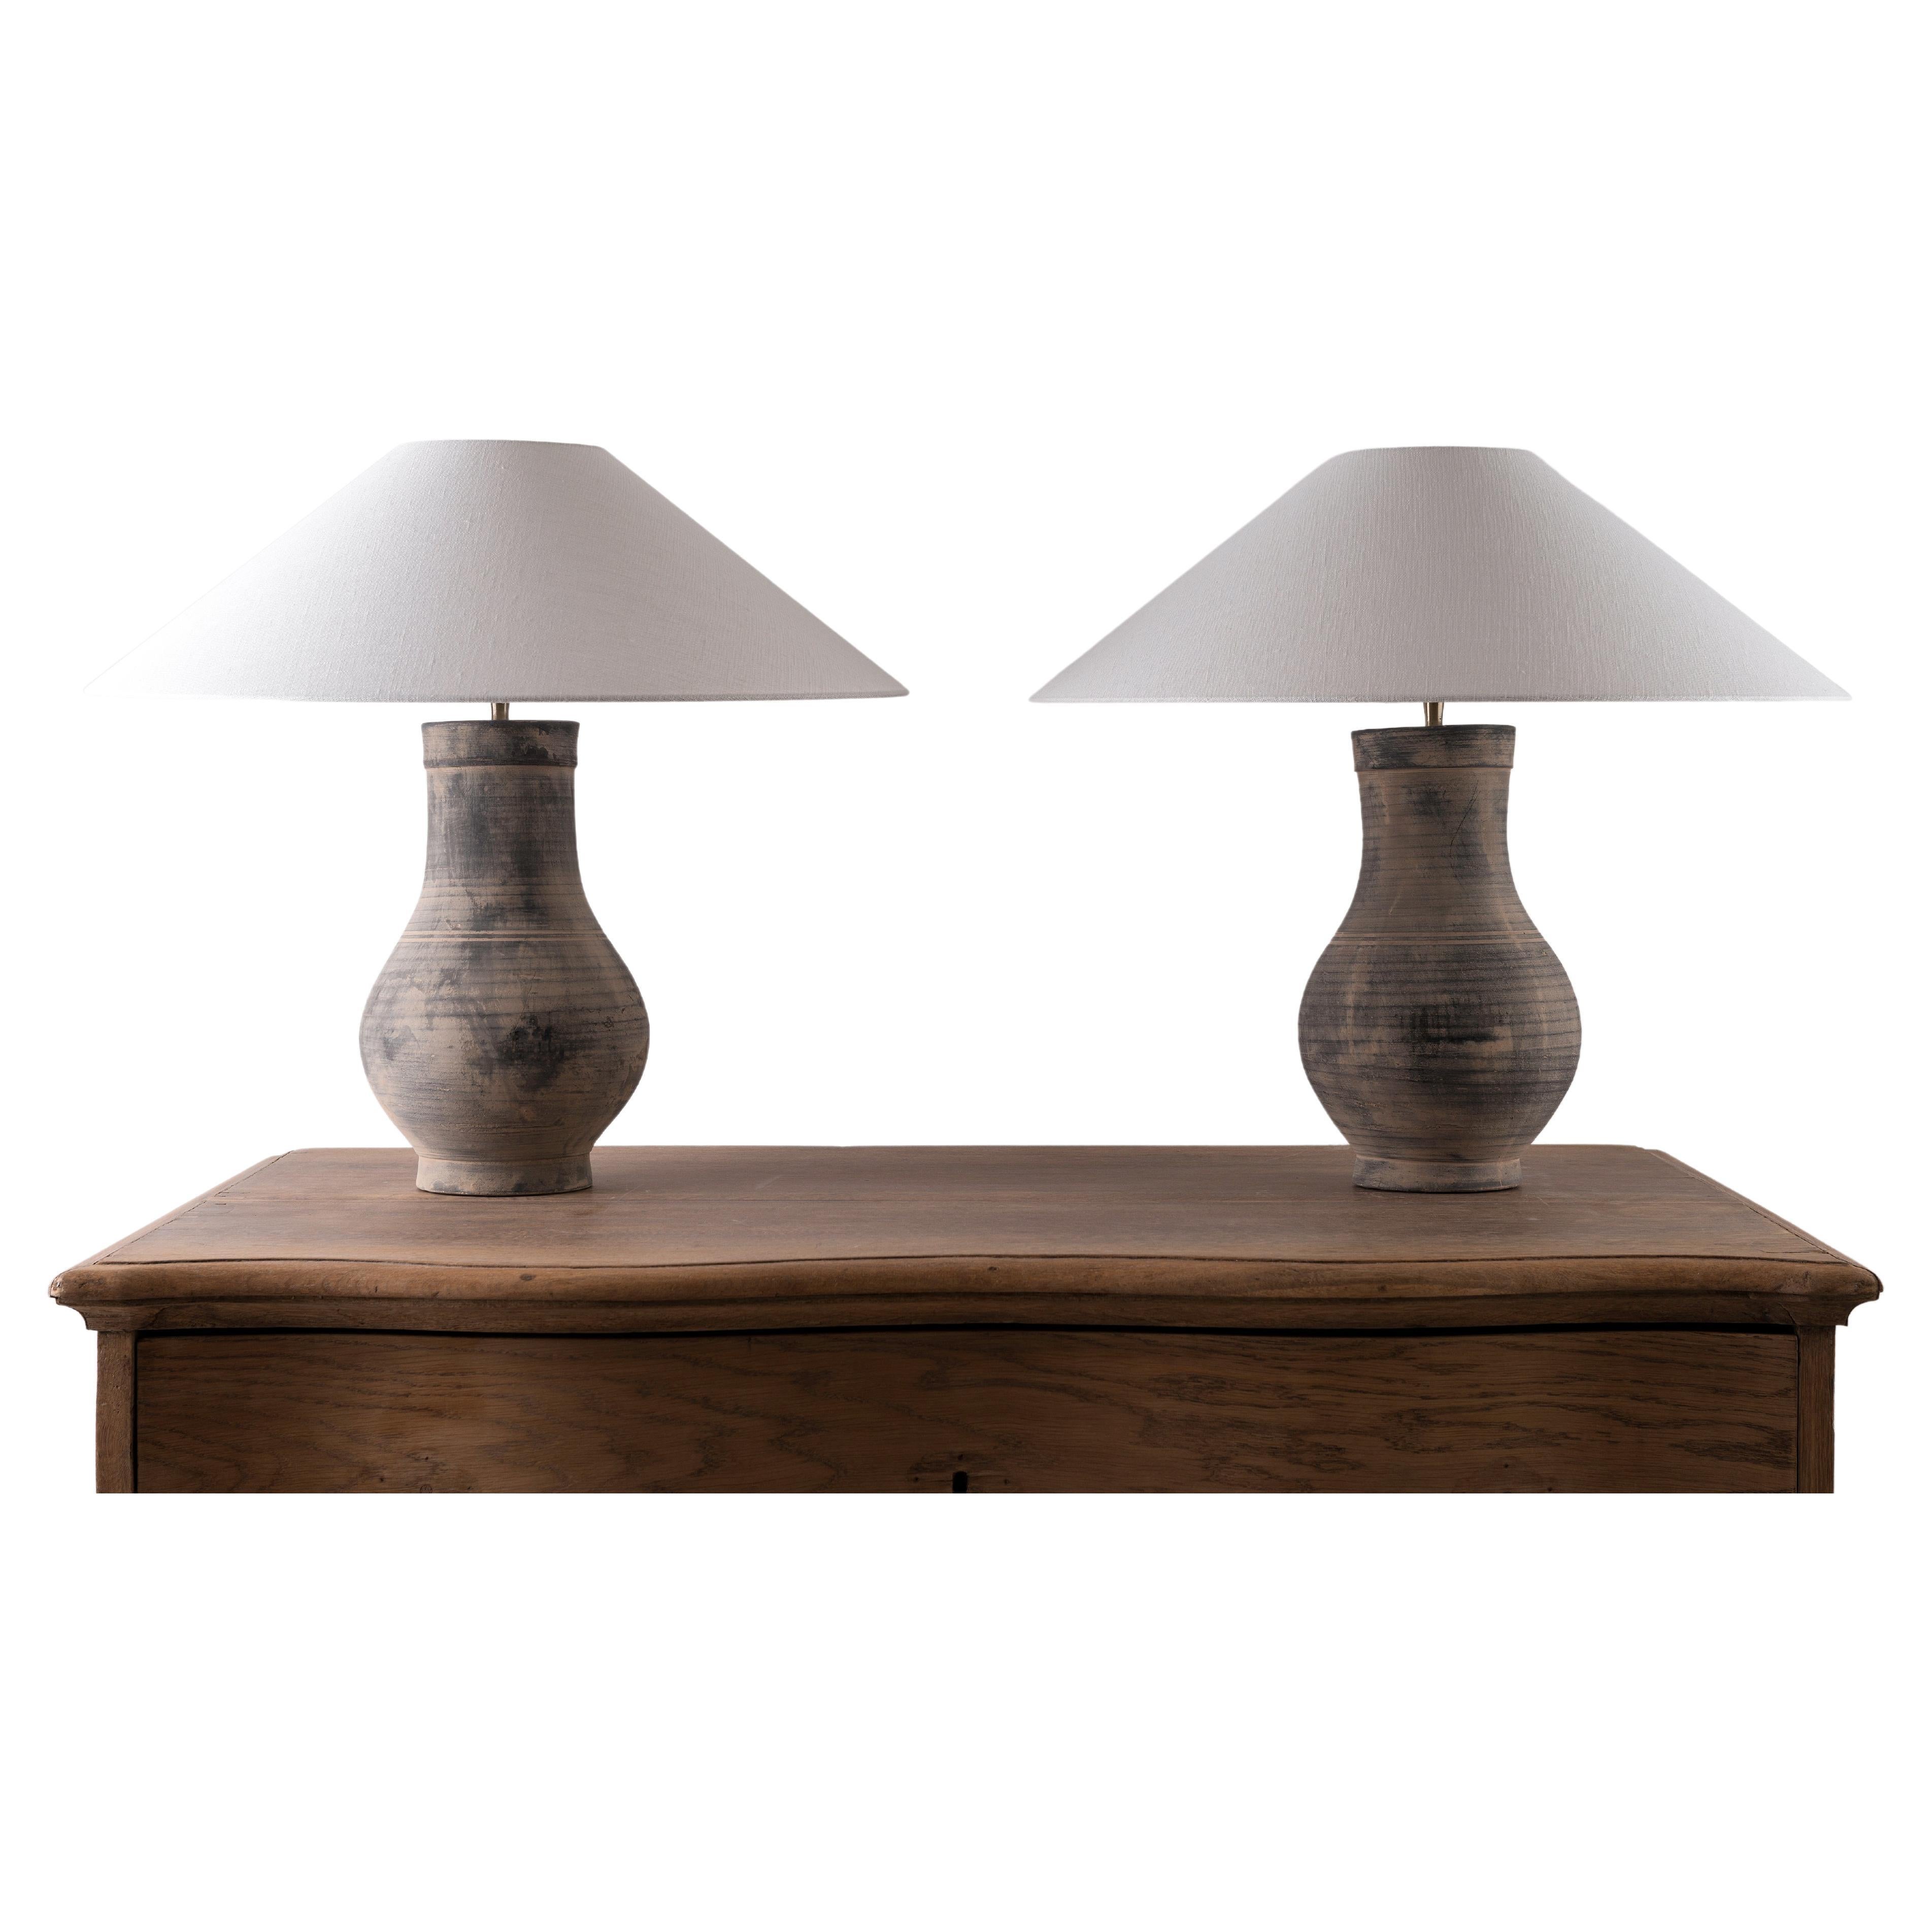 Pair of Han Style Lamp with Handmade Belgian Linen Shades